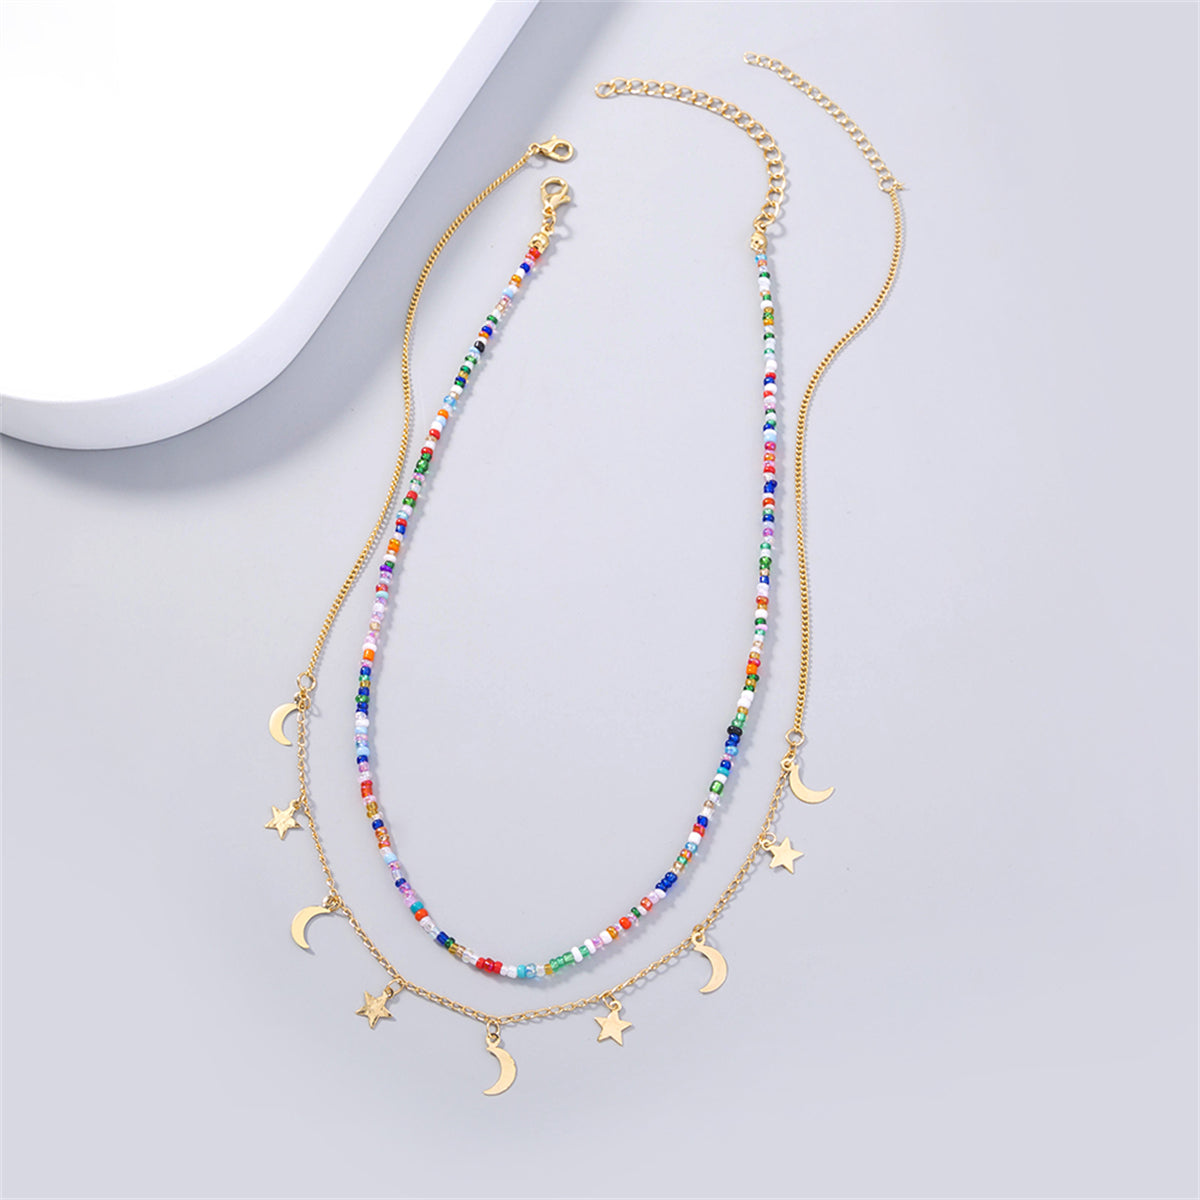 Blue & Red Acrylic Beaded Necklace & 18K Gold-Plated Celestial Pendant Necklace Set